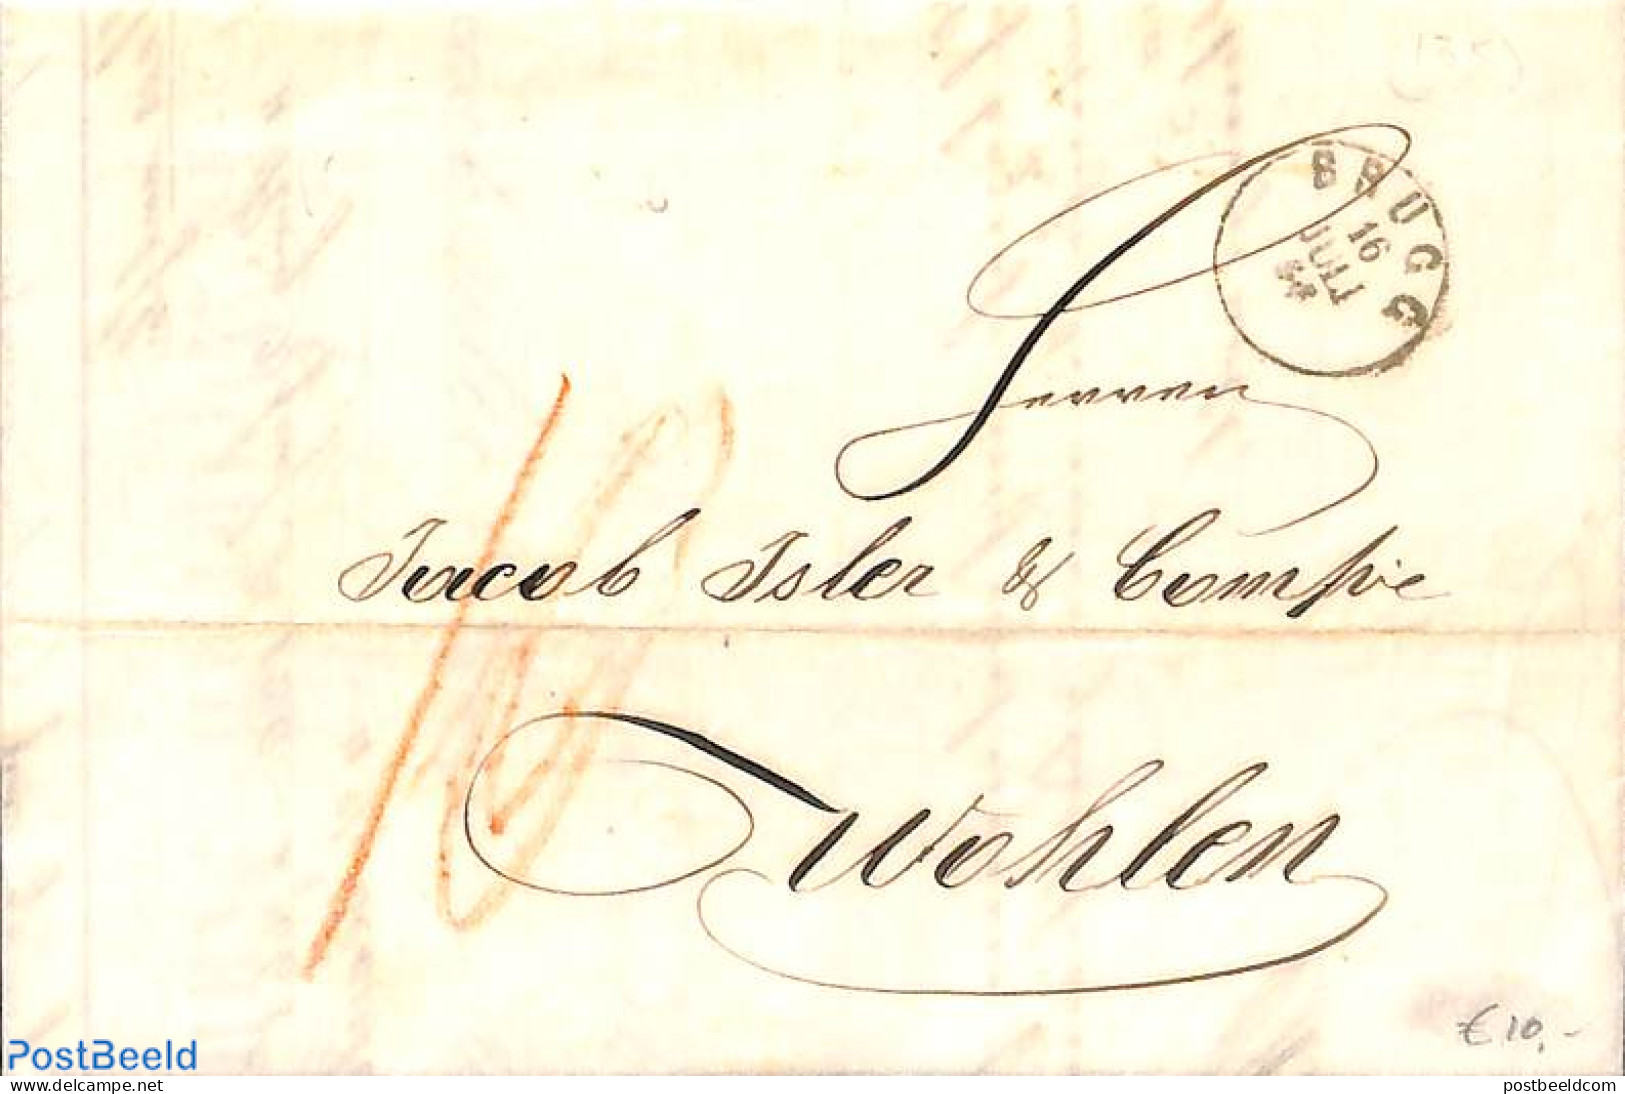 Switzerland 1856 Folding Invoice  From Windisch To Wohlen, Postal History - Lettres & Documents